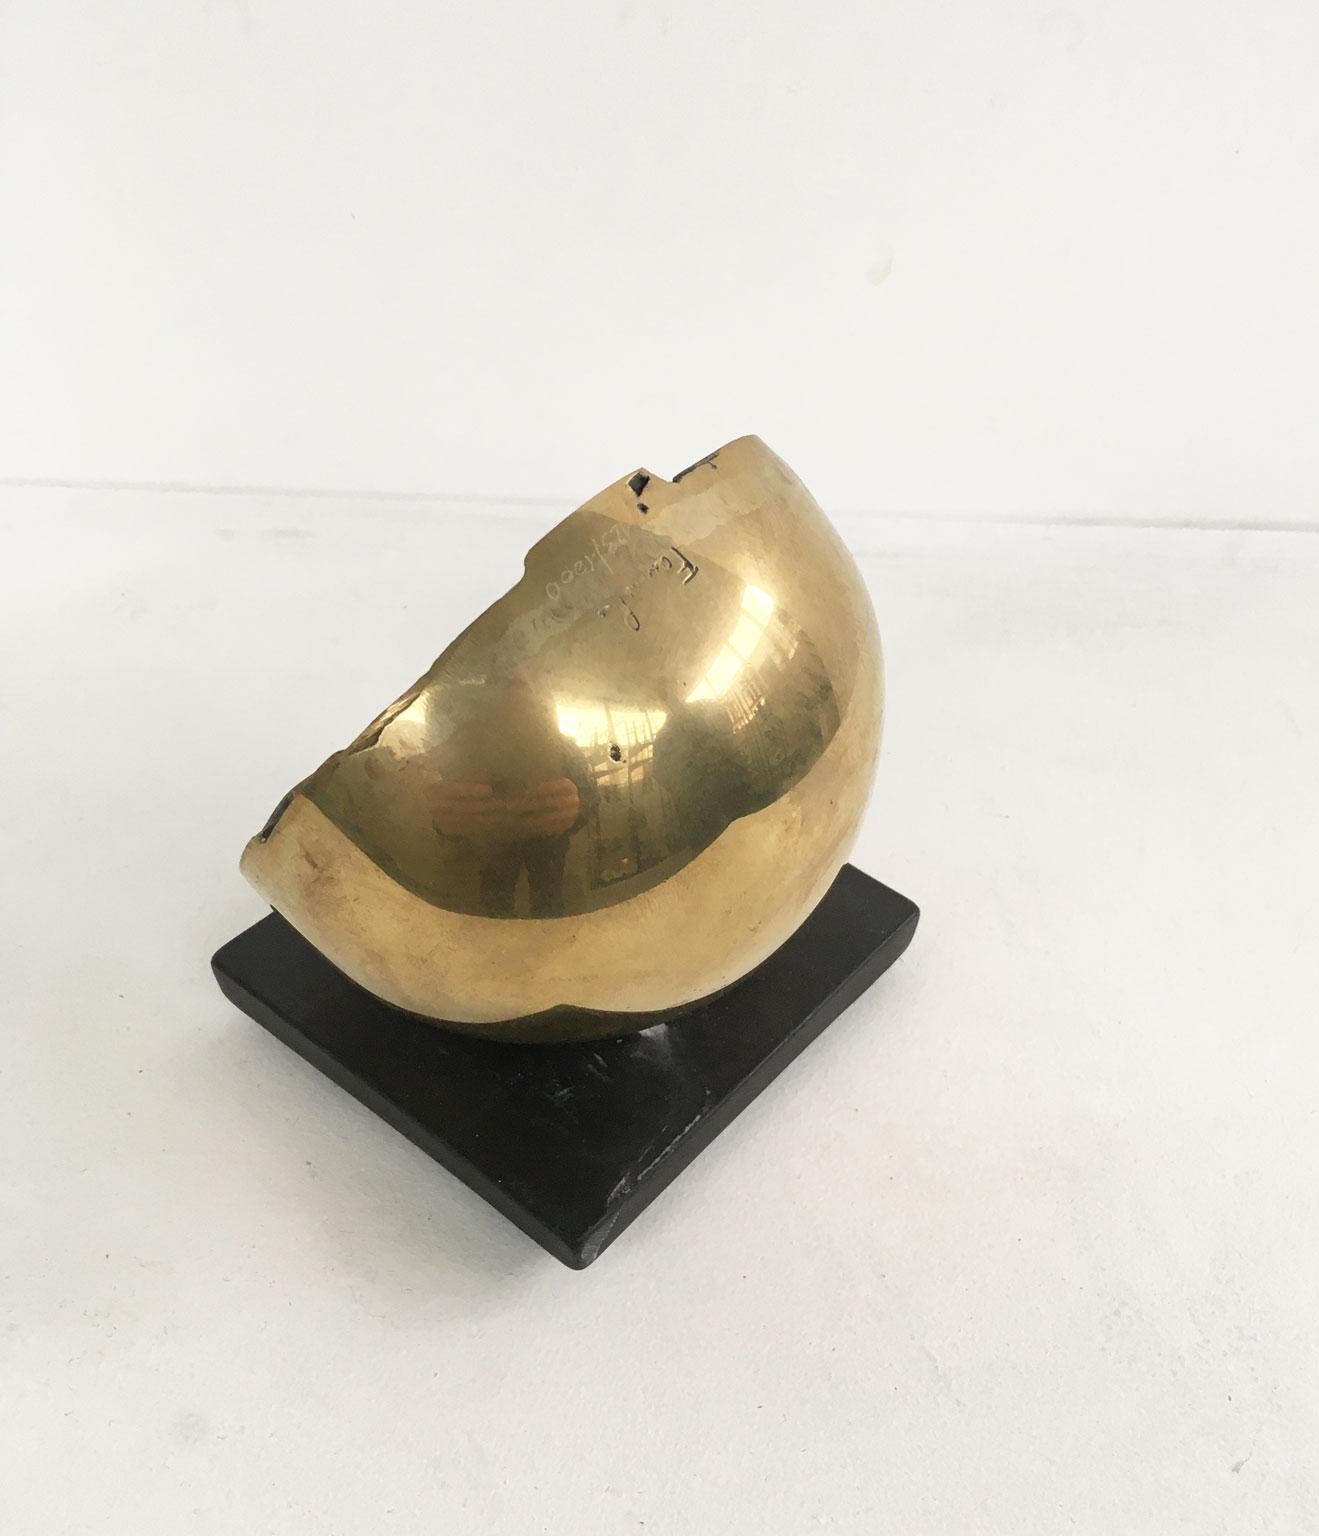 1978 Italy Bronze Abstract Sculpture by Fanna Roncoroni Labirinto Labyrinth For Sale 7